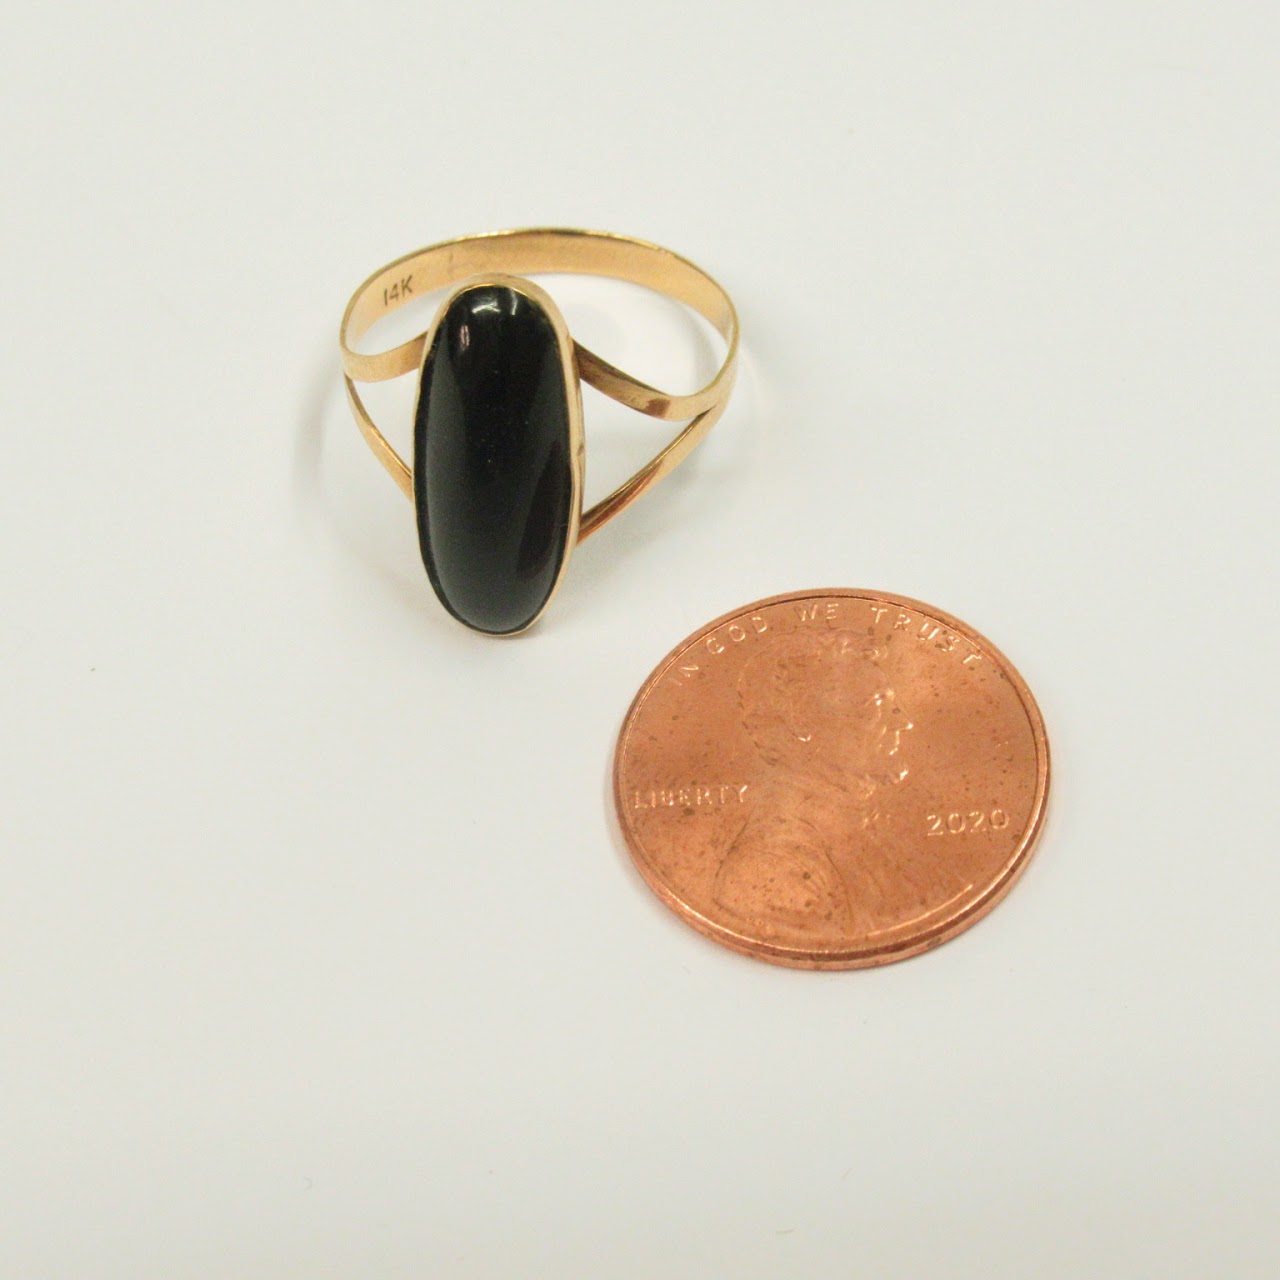 14K Gold and Onyx Ring